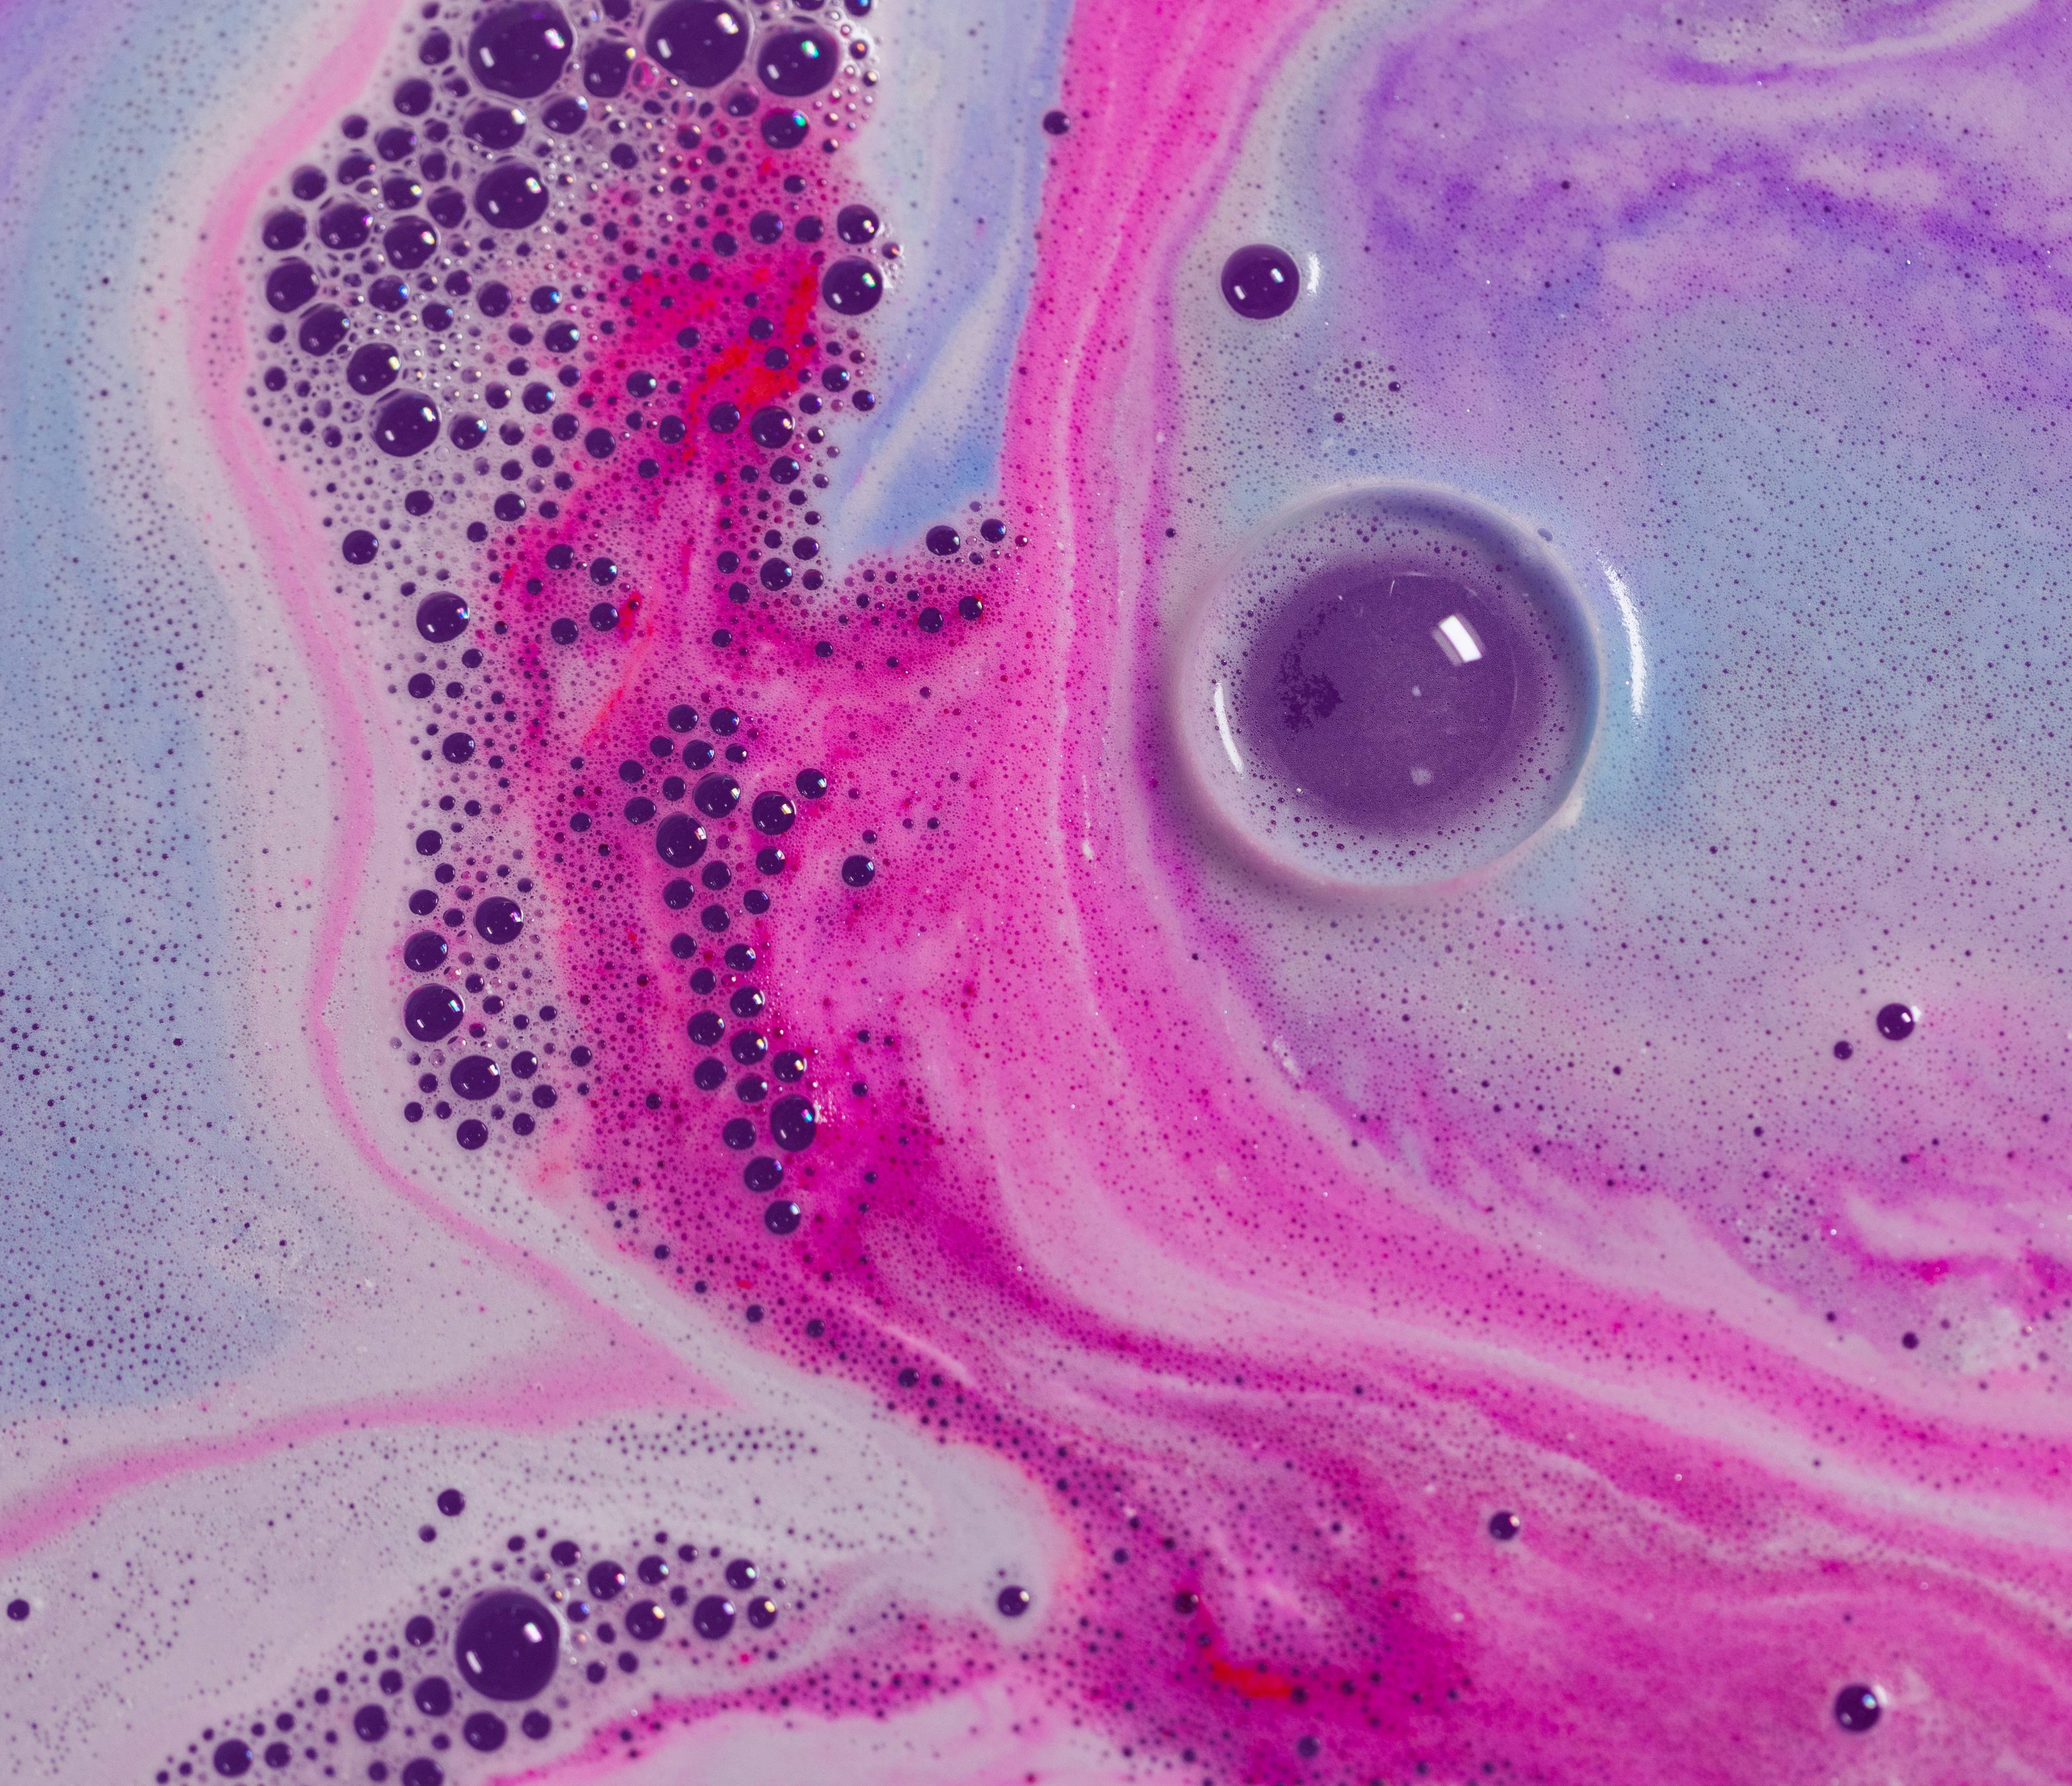 A close-up of colourful swirls of magical pink, blue and purple.